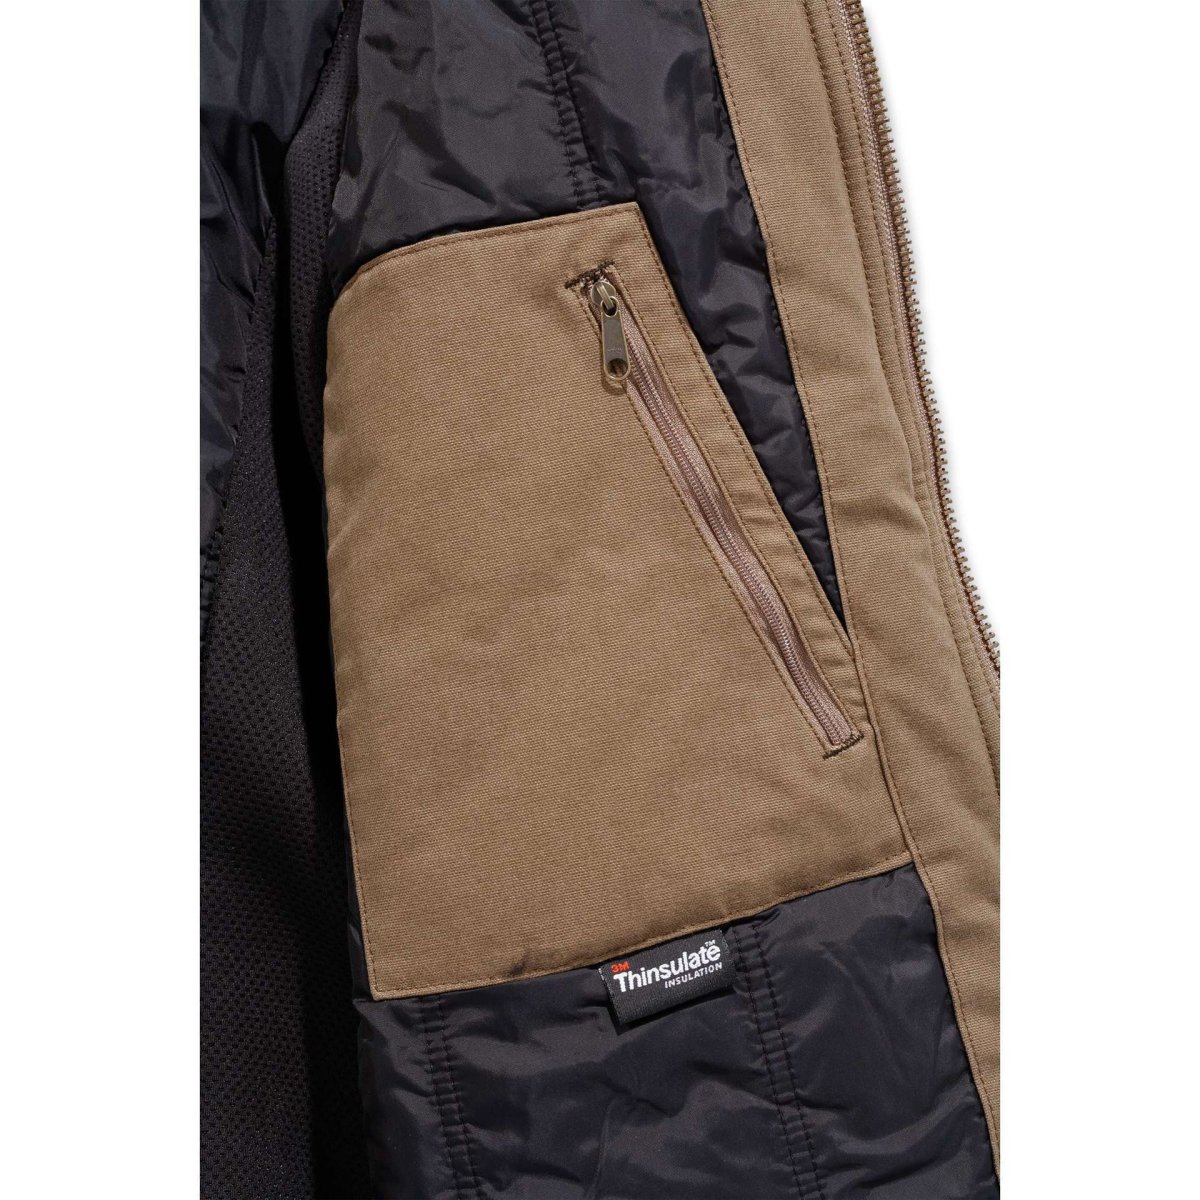 0010949  quick duck full swing cryder jacket 102207 canyon brown carhartt